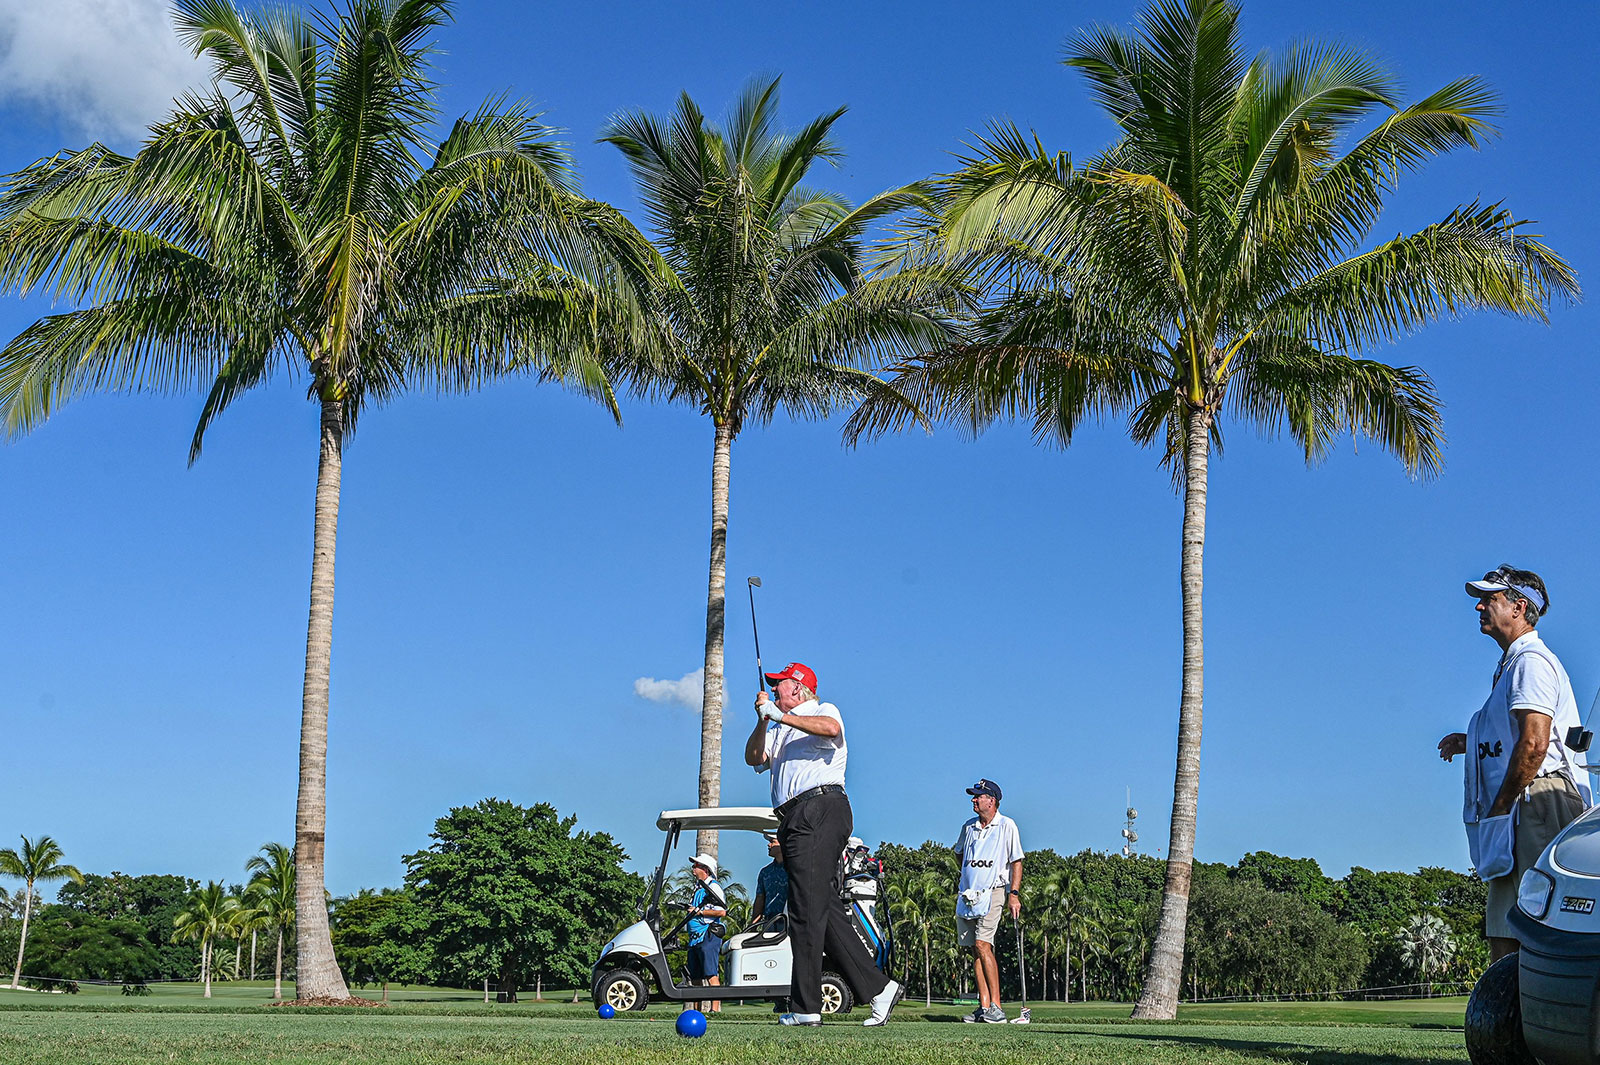 Former President Donald Trump plays golf at Trump National Doral ahead of a LIV Golf event in October 2022.